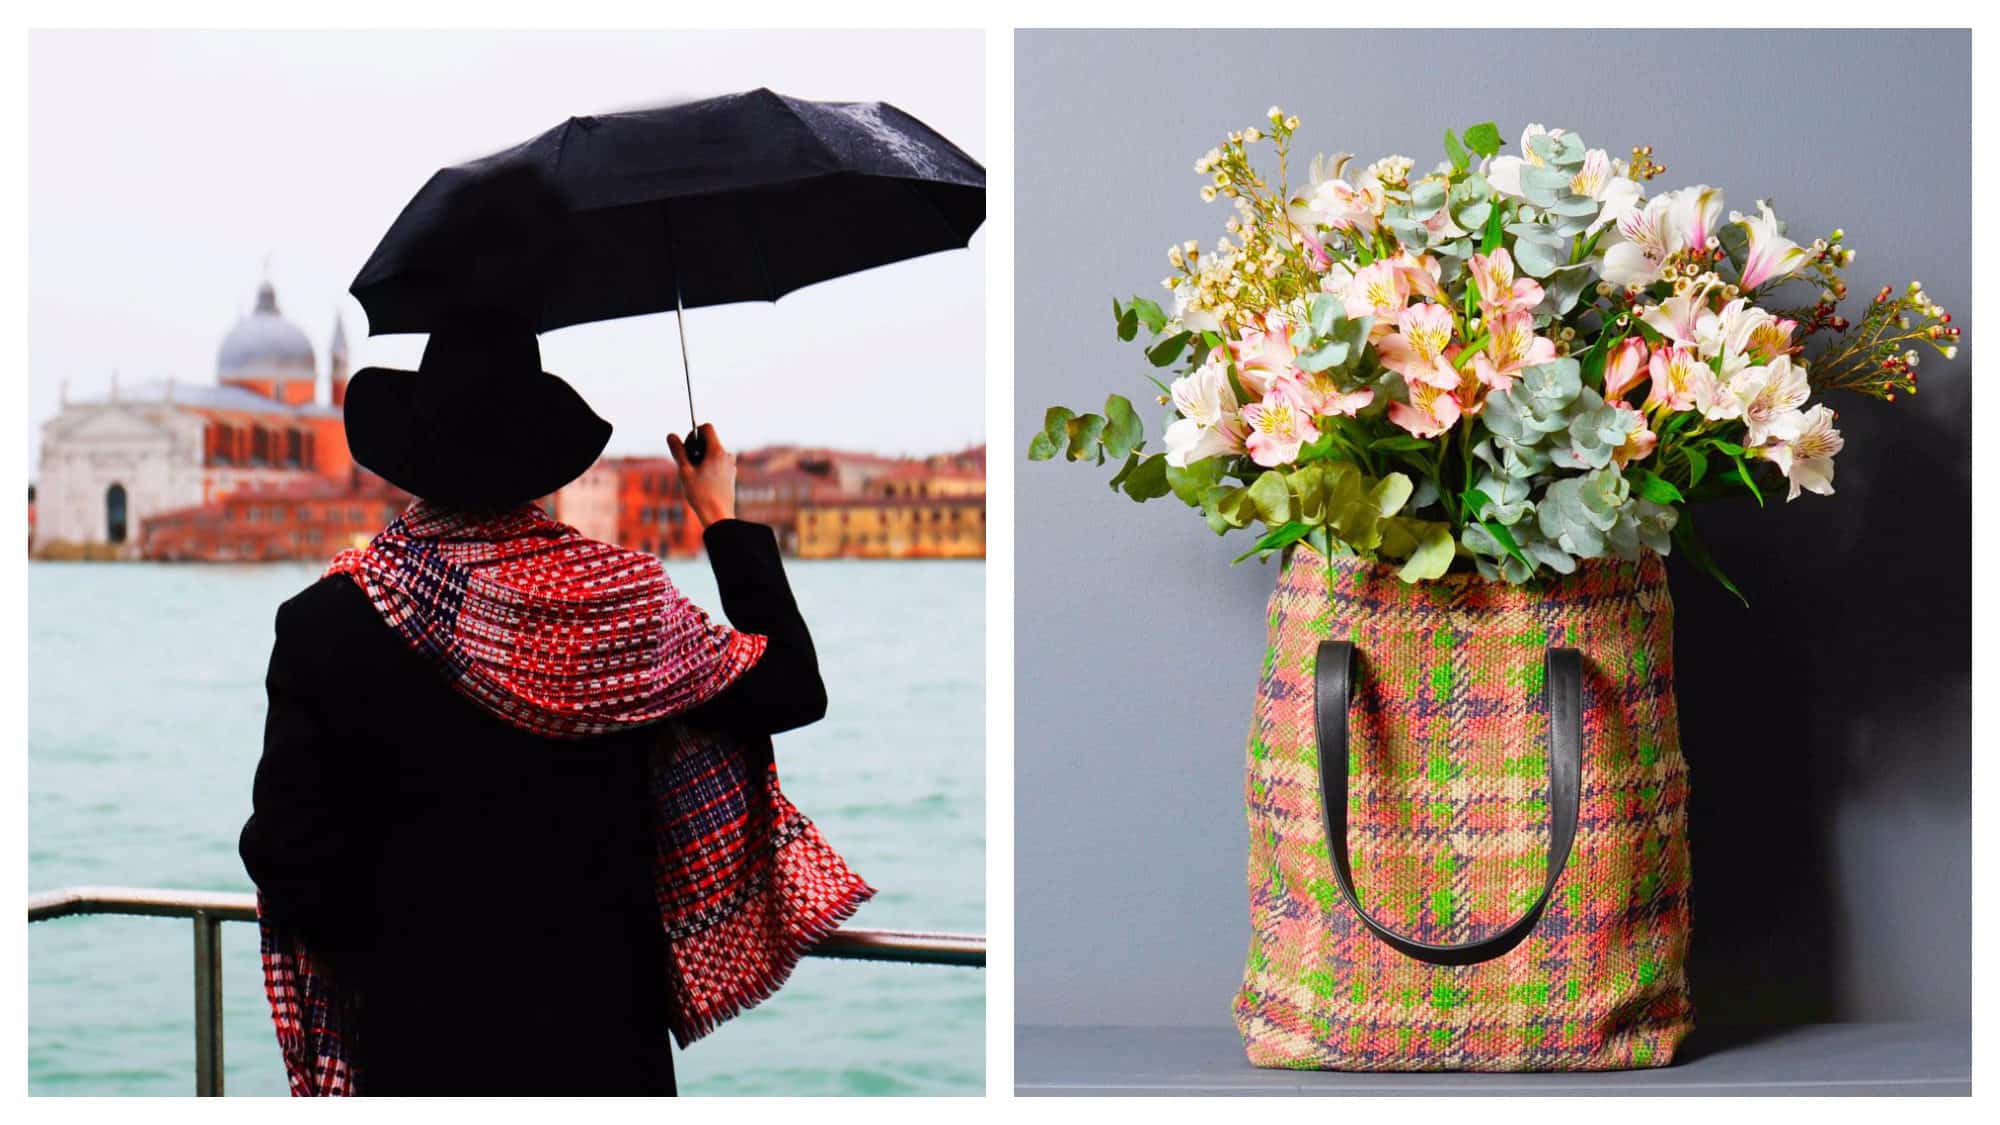 Accessories by French brand EPICE like a colorful red scarf worn by a woman in black standing on the canals of Venice (left) and tartan handbag with a bun of flowers inside it (right).